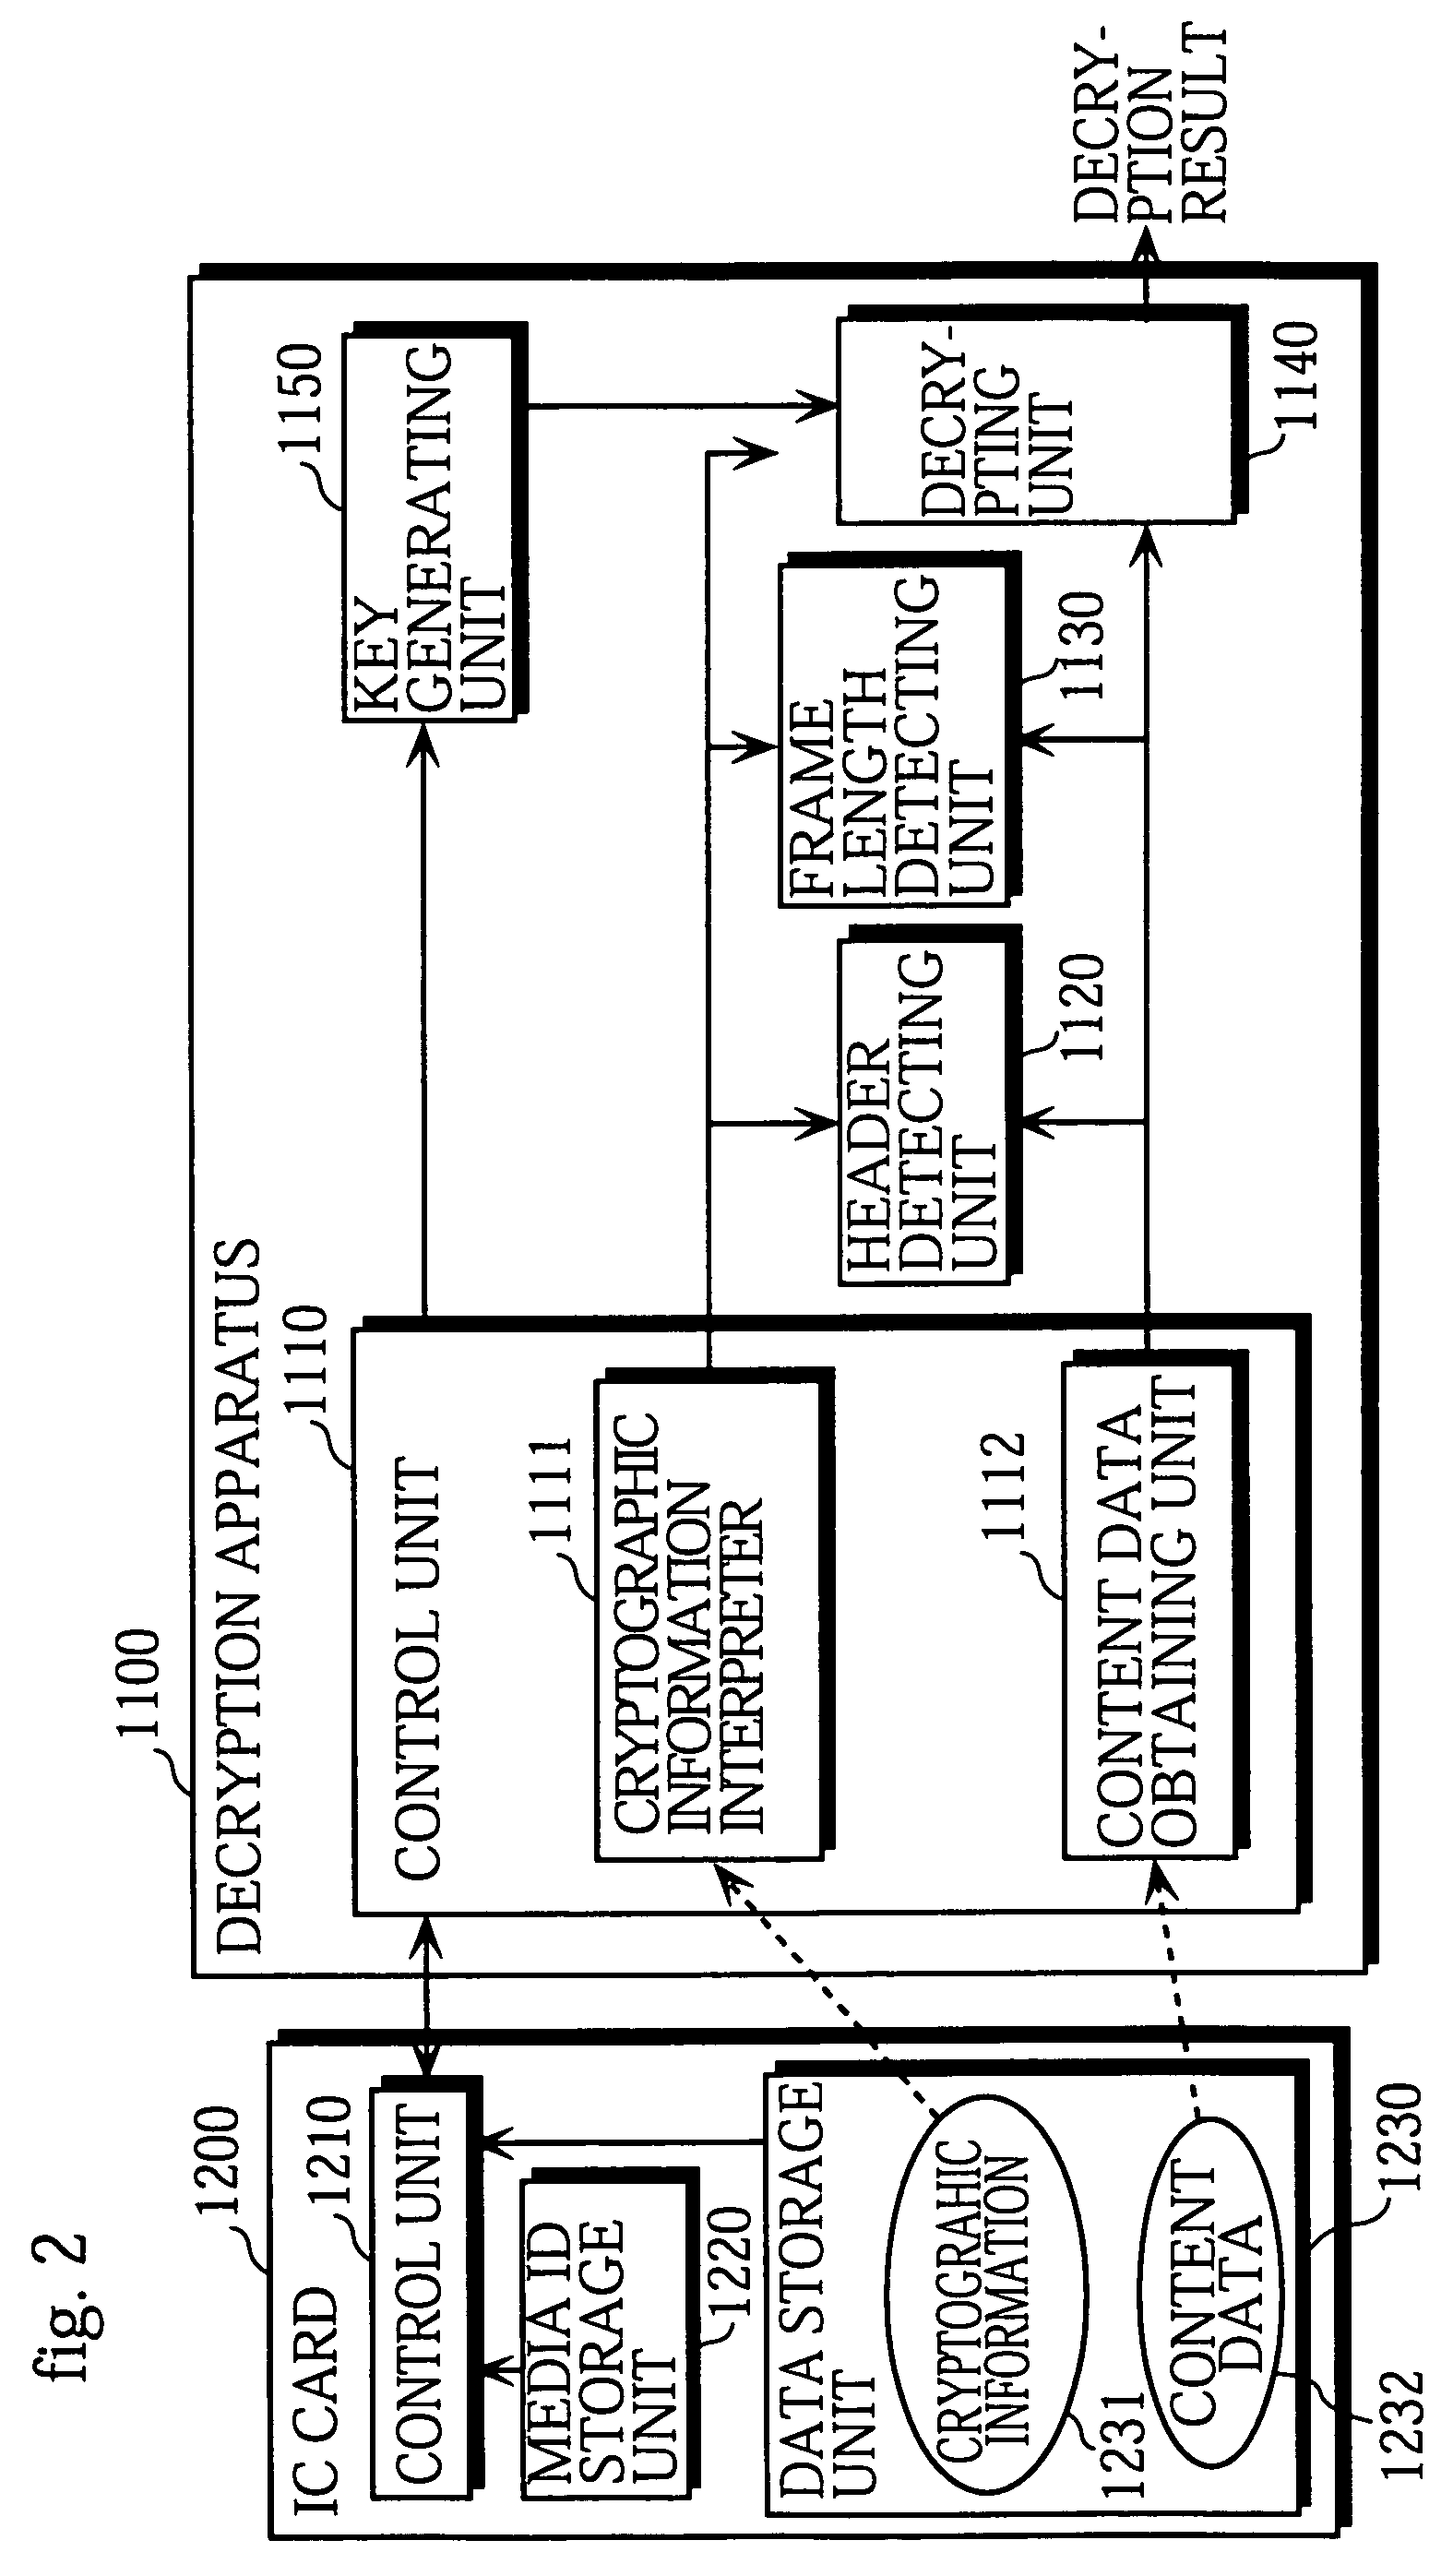 Cryptographic apparatus for performing cryptography on a specified area of content data